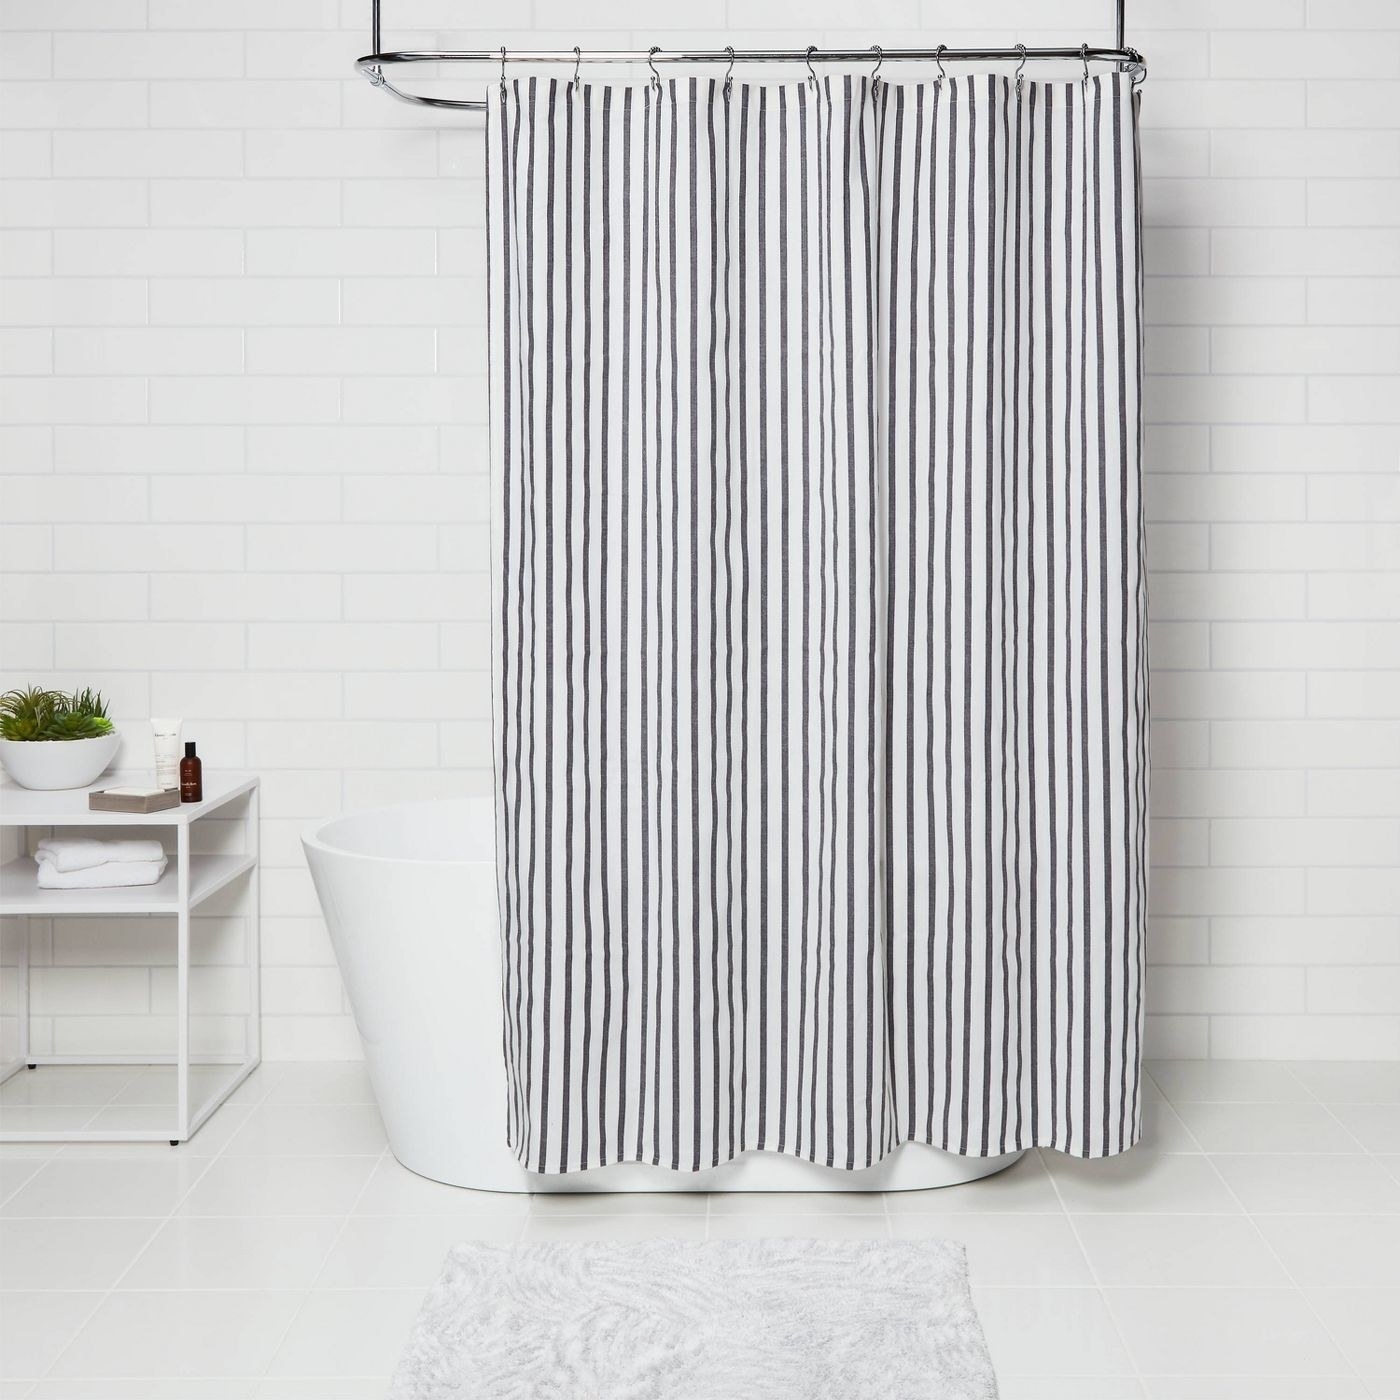 Black and white striped shower curtain 